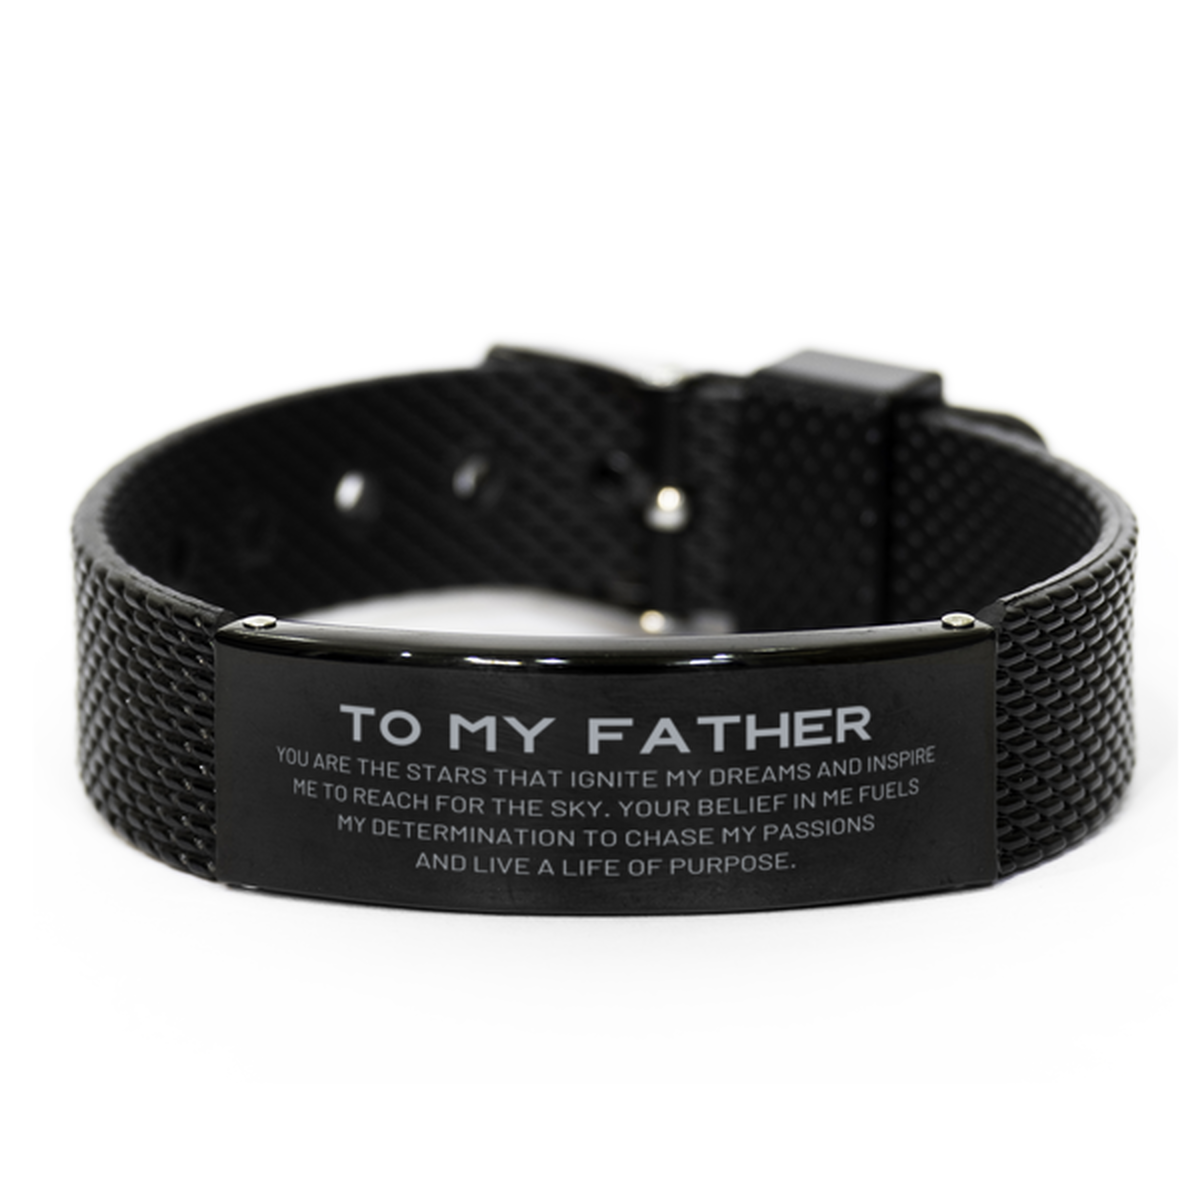 To My Father Black Shark Mesh Bracelet, You are the stars that ignite my dreams and inspire me to reach for the sky, Birthday Unique Gifts For Father, Thank You Gifts For Father